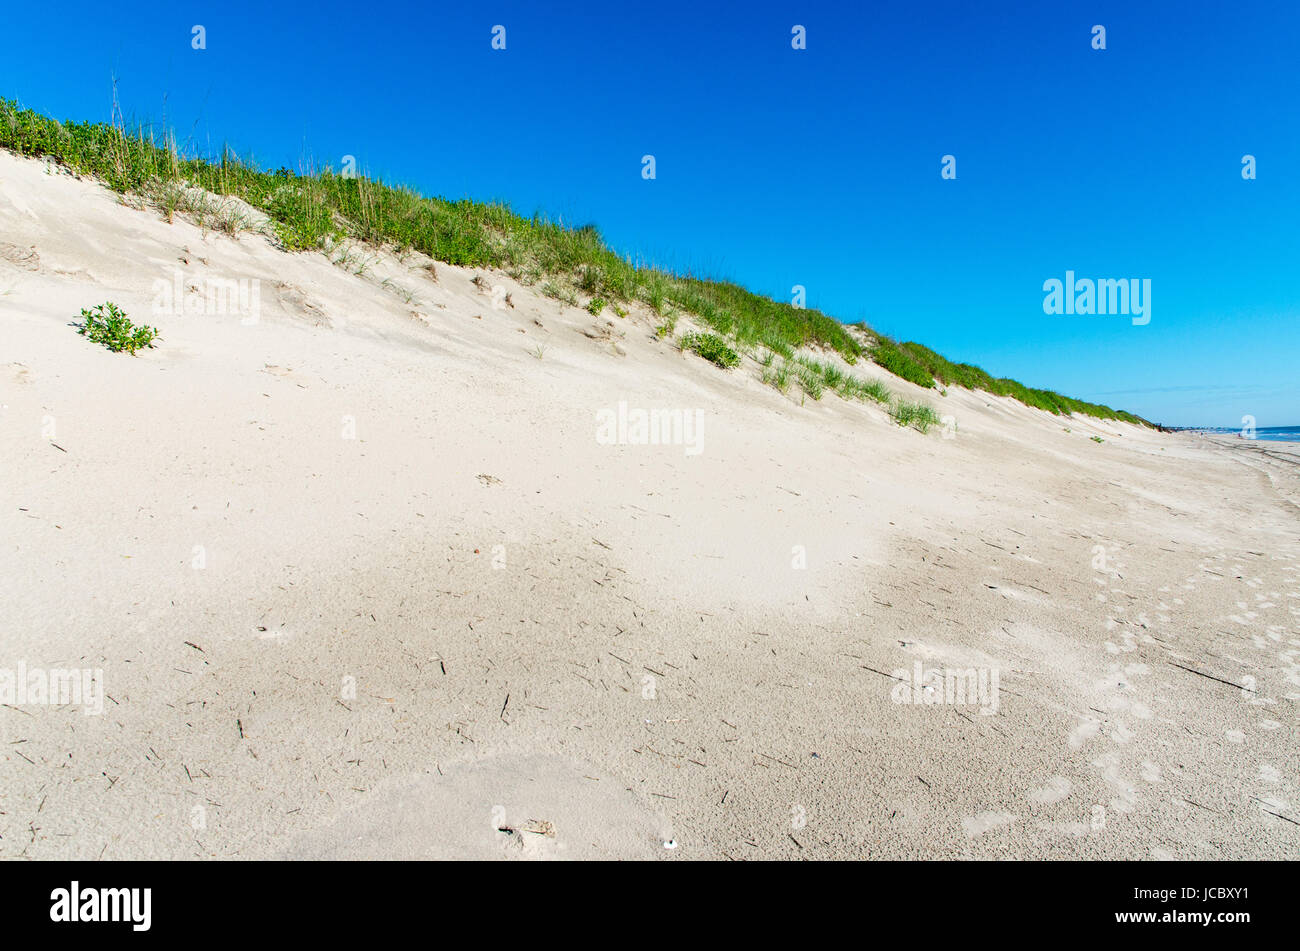 Dunes, stairs and erosion fences at Outer Banks North Carolina Stock Photo